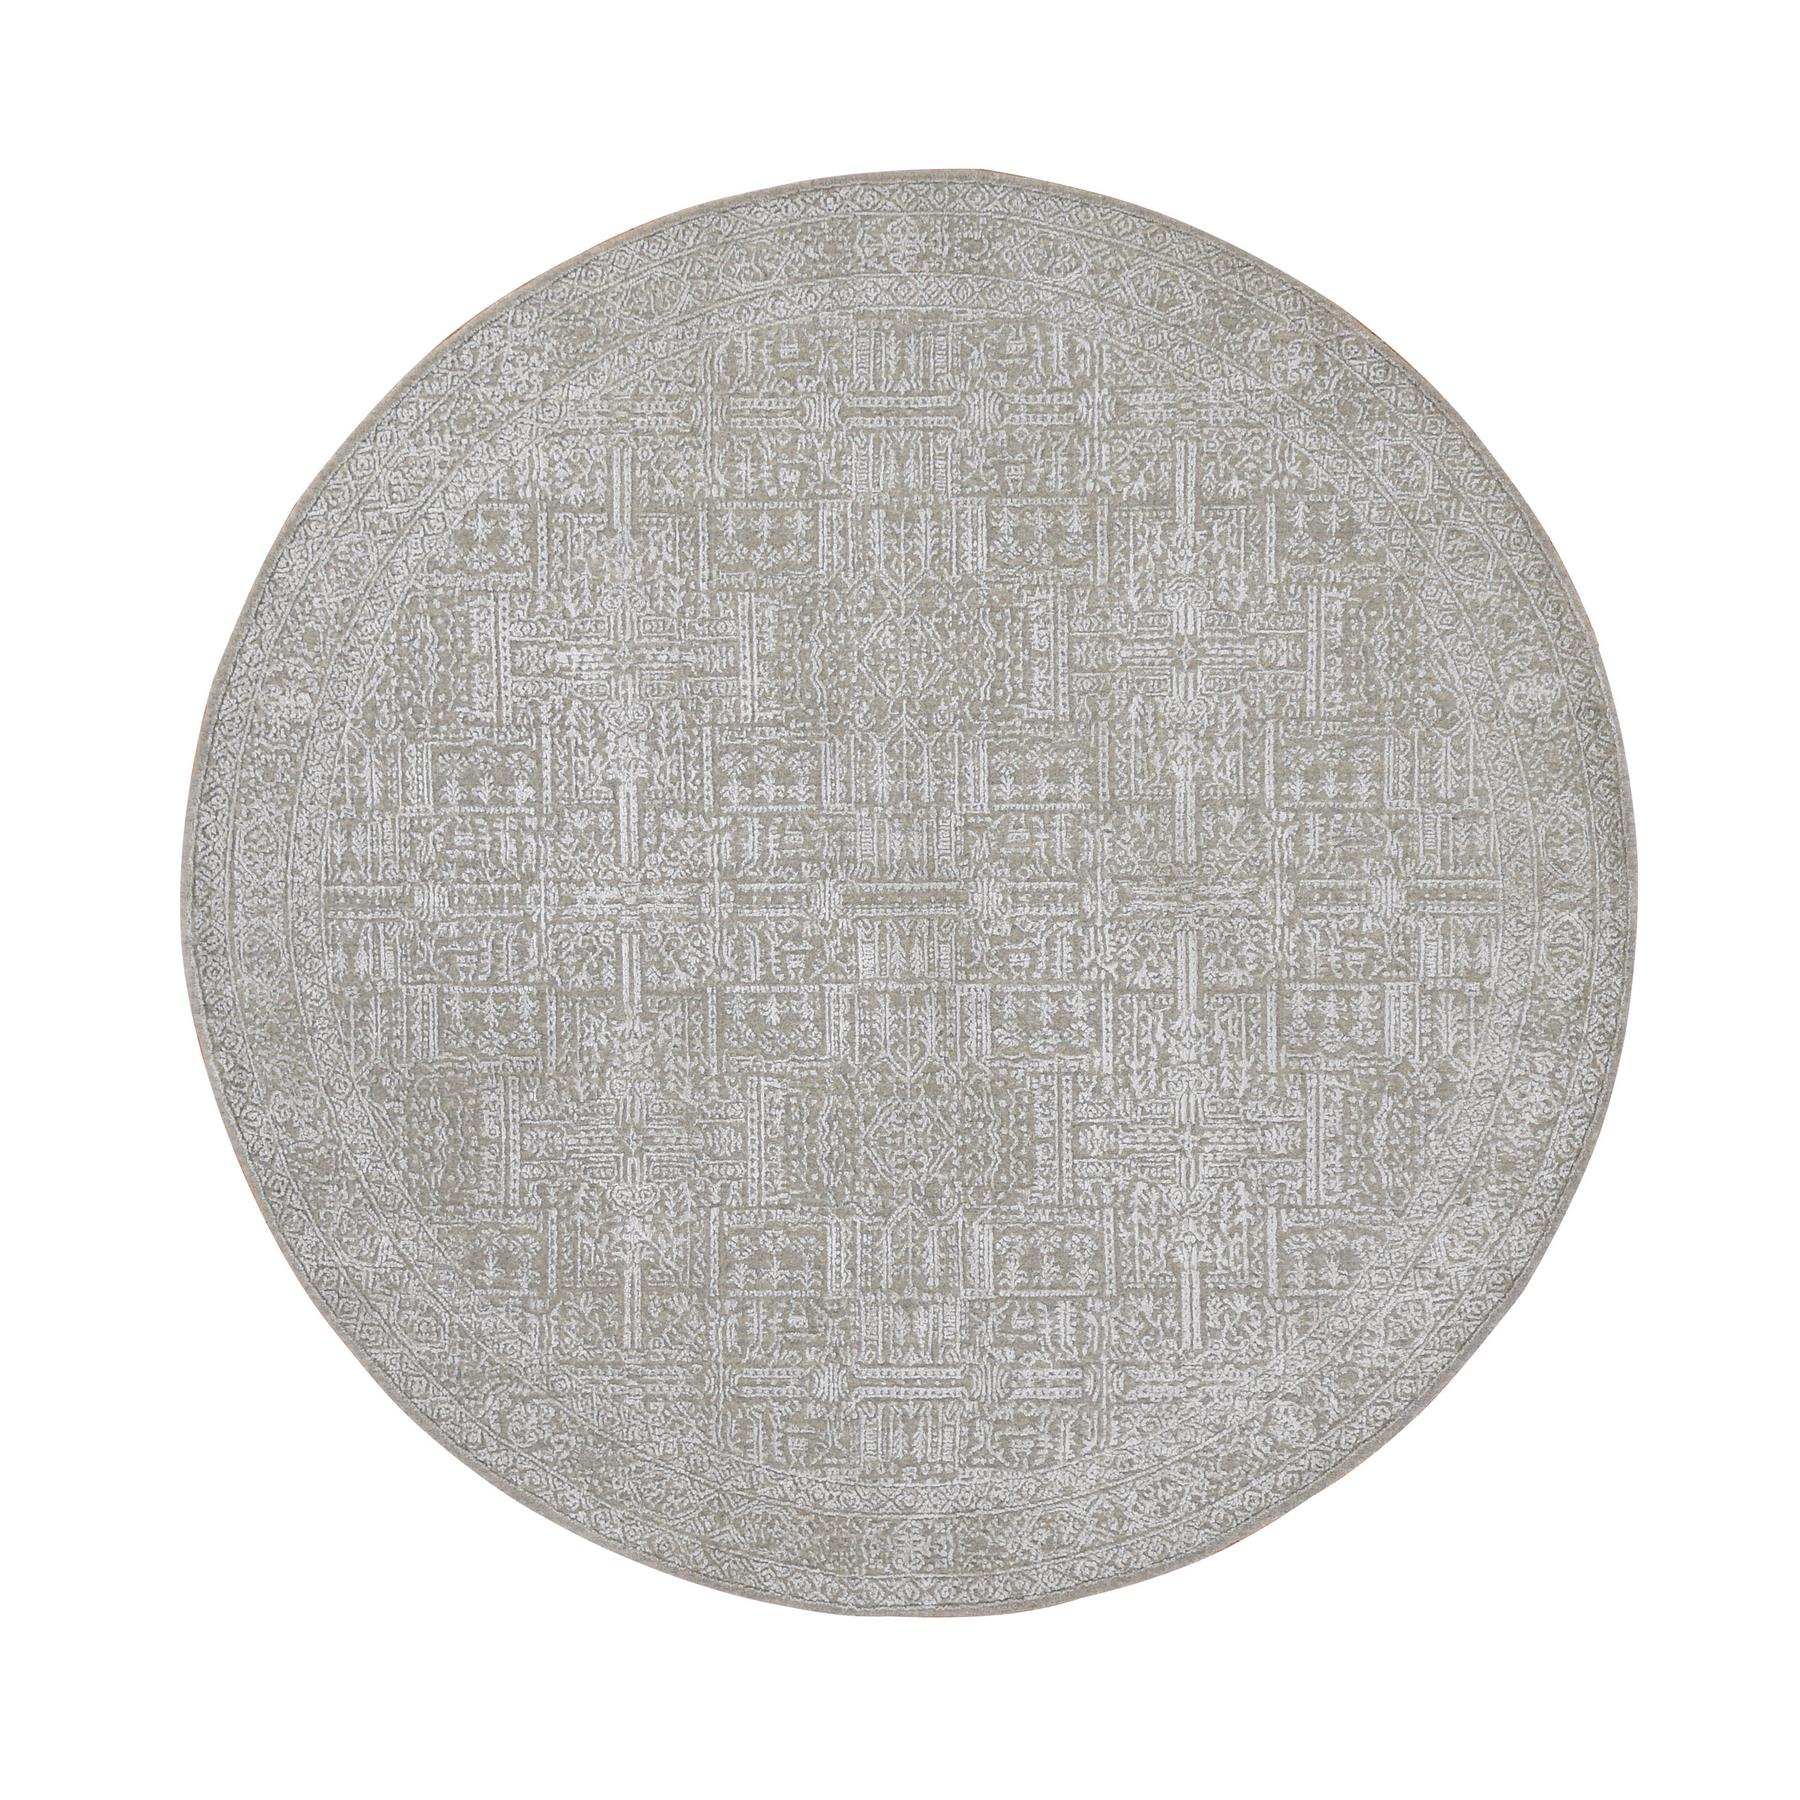 7'10"x7'10" Thunder Gray, Wool and Plant Based Silk, Hand Loomed, Fine Jacquard with Erased Design, Round Oriental Rug 